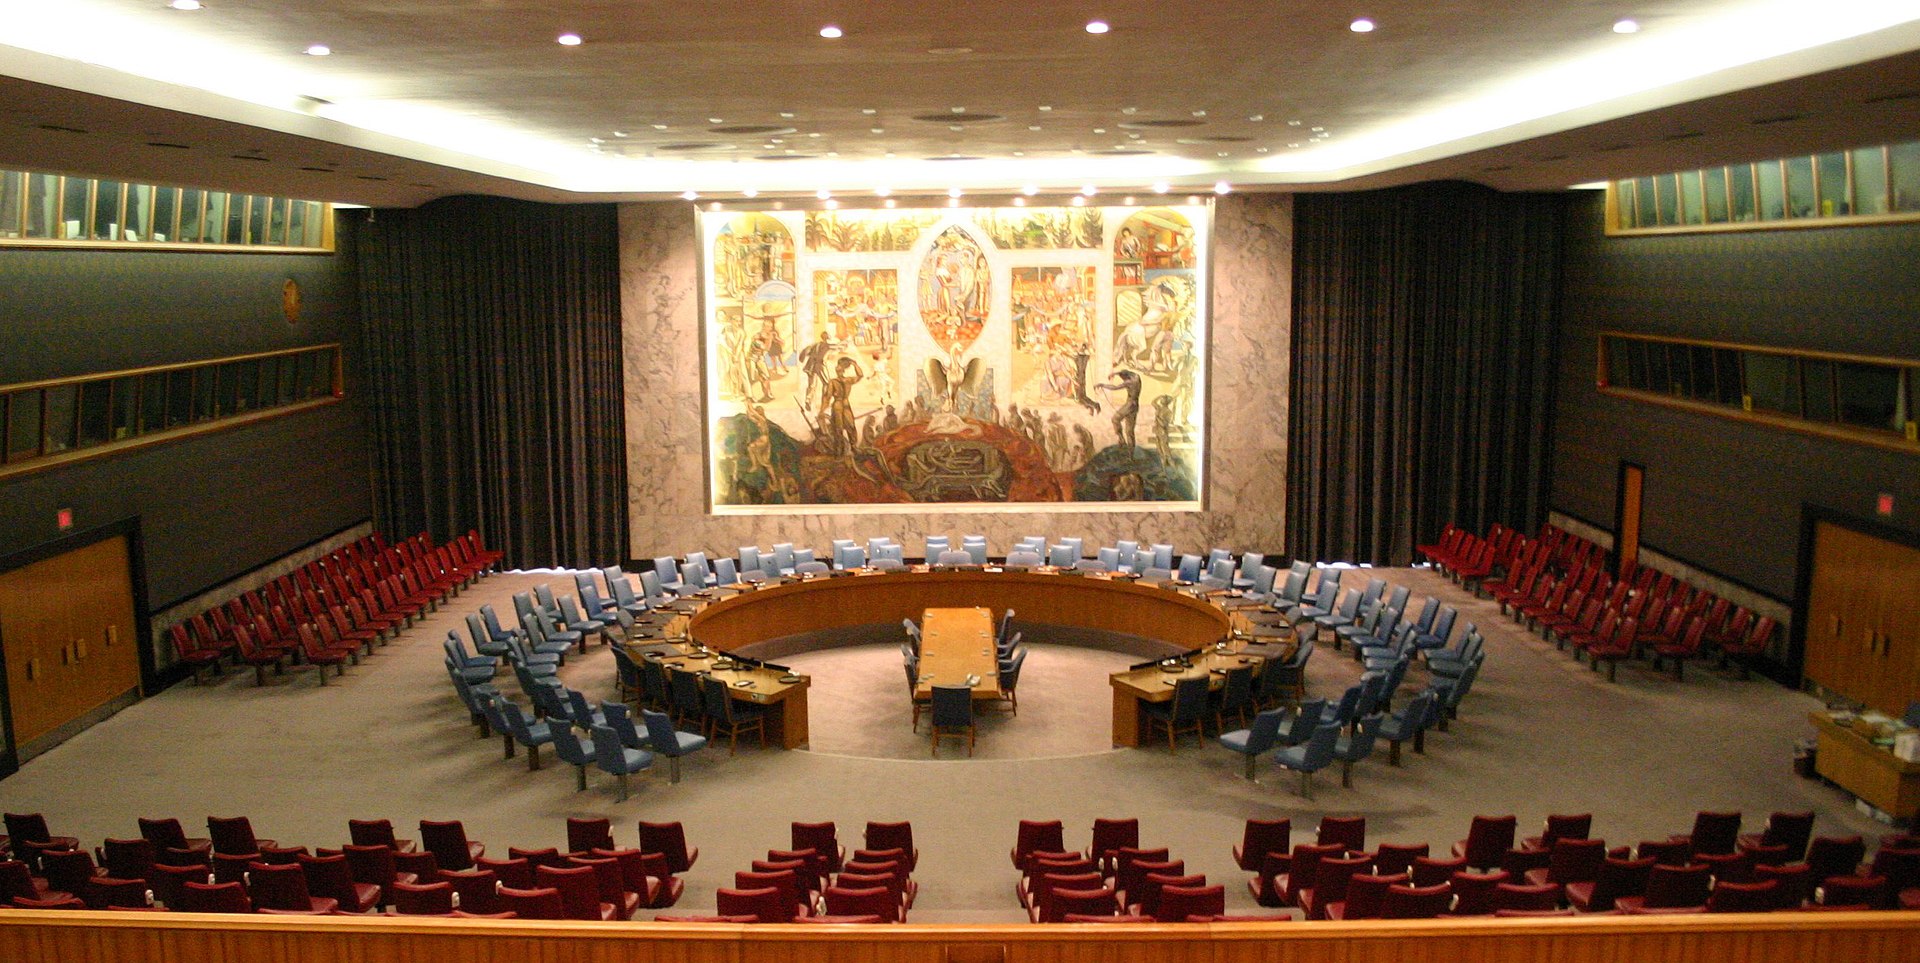 The United Nations Security Council Chamber in New York